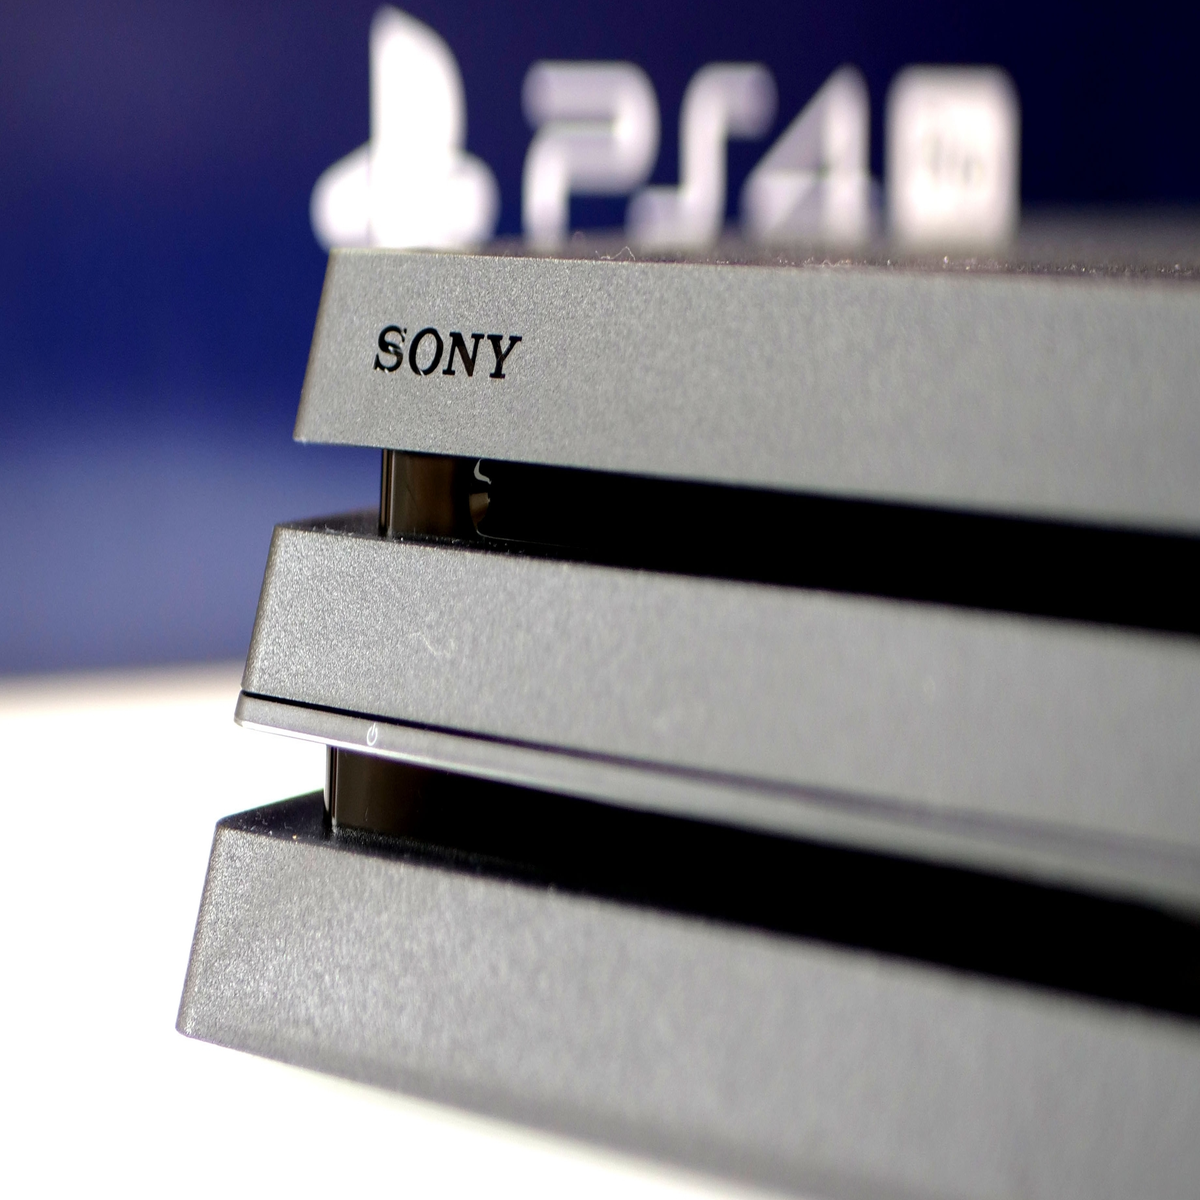 PlayStation 4 Pro CUH-7200 review: the latest, quietest hardware revision